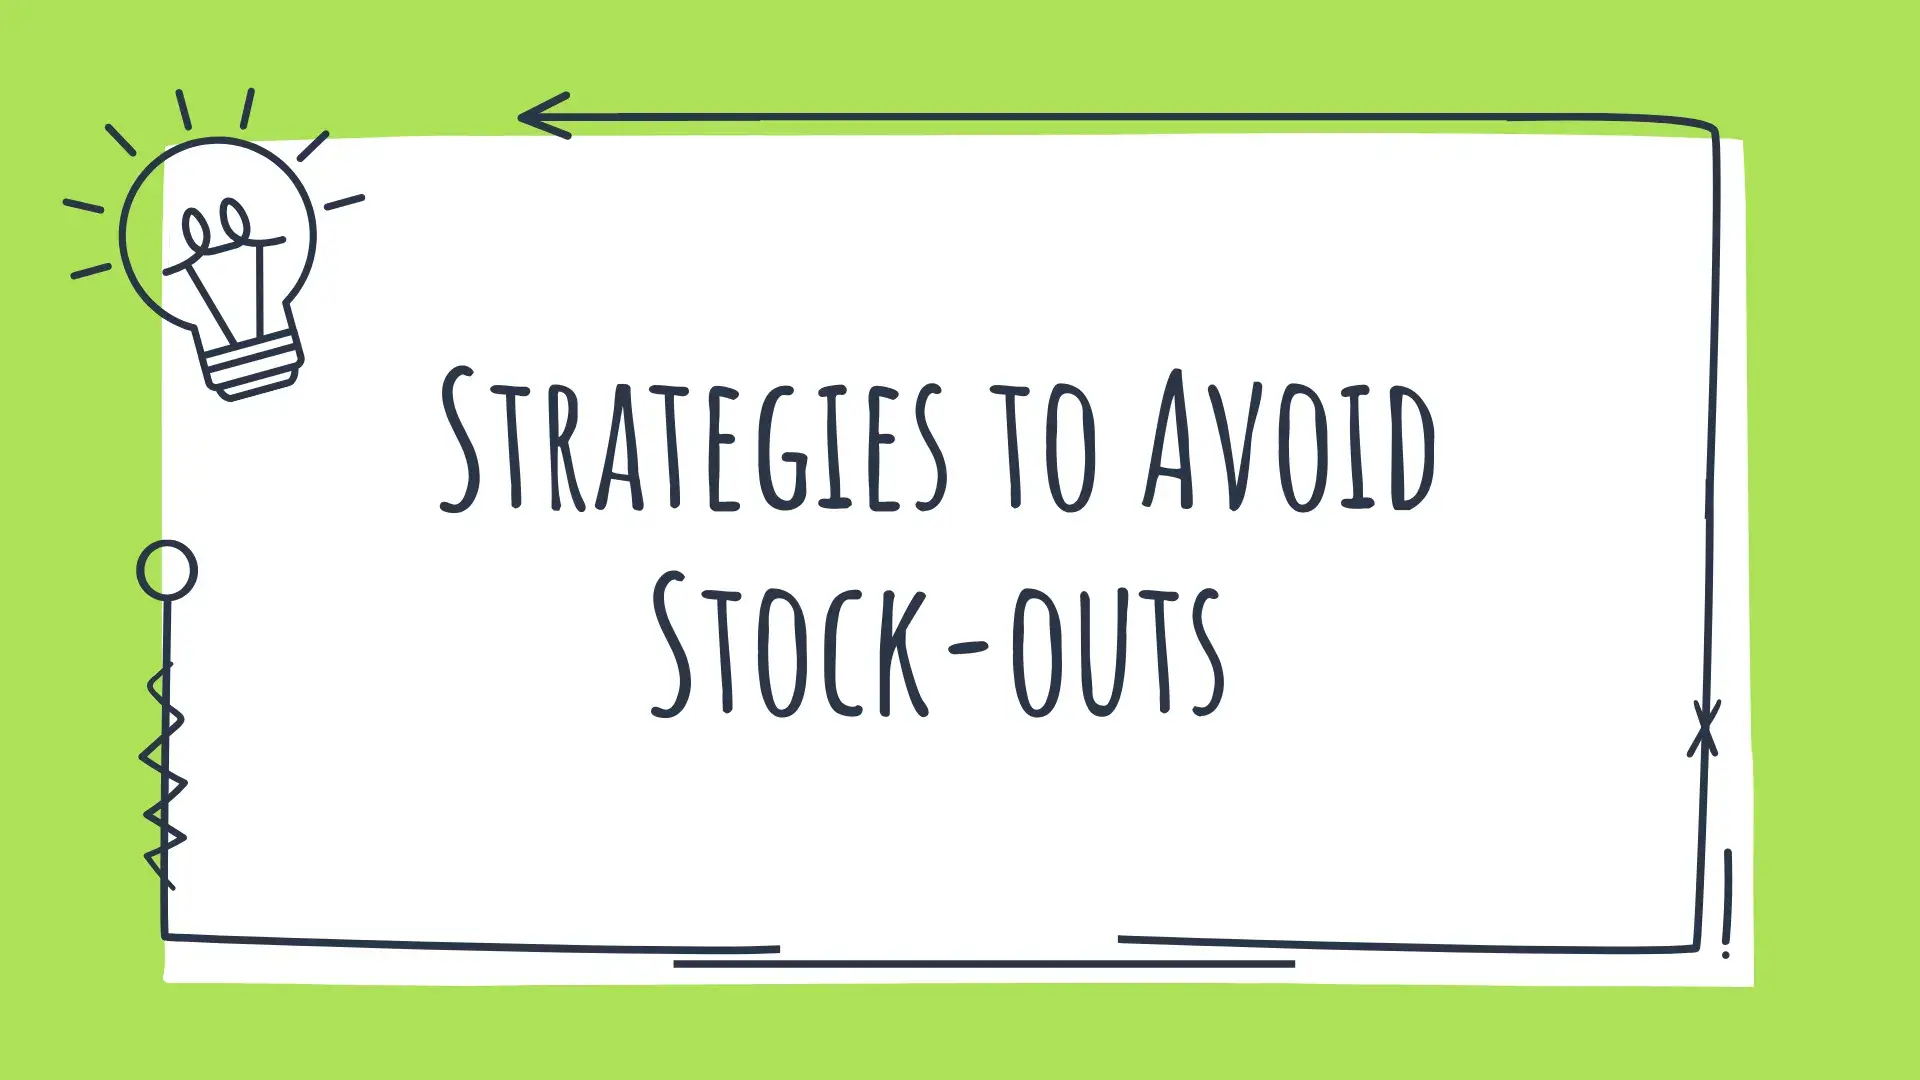 Strategies to Avoid Stock-outs